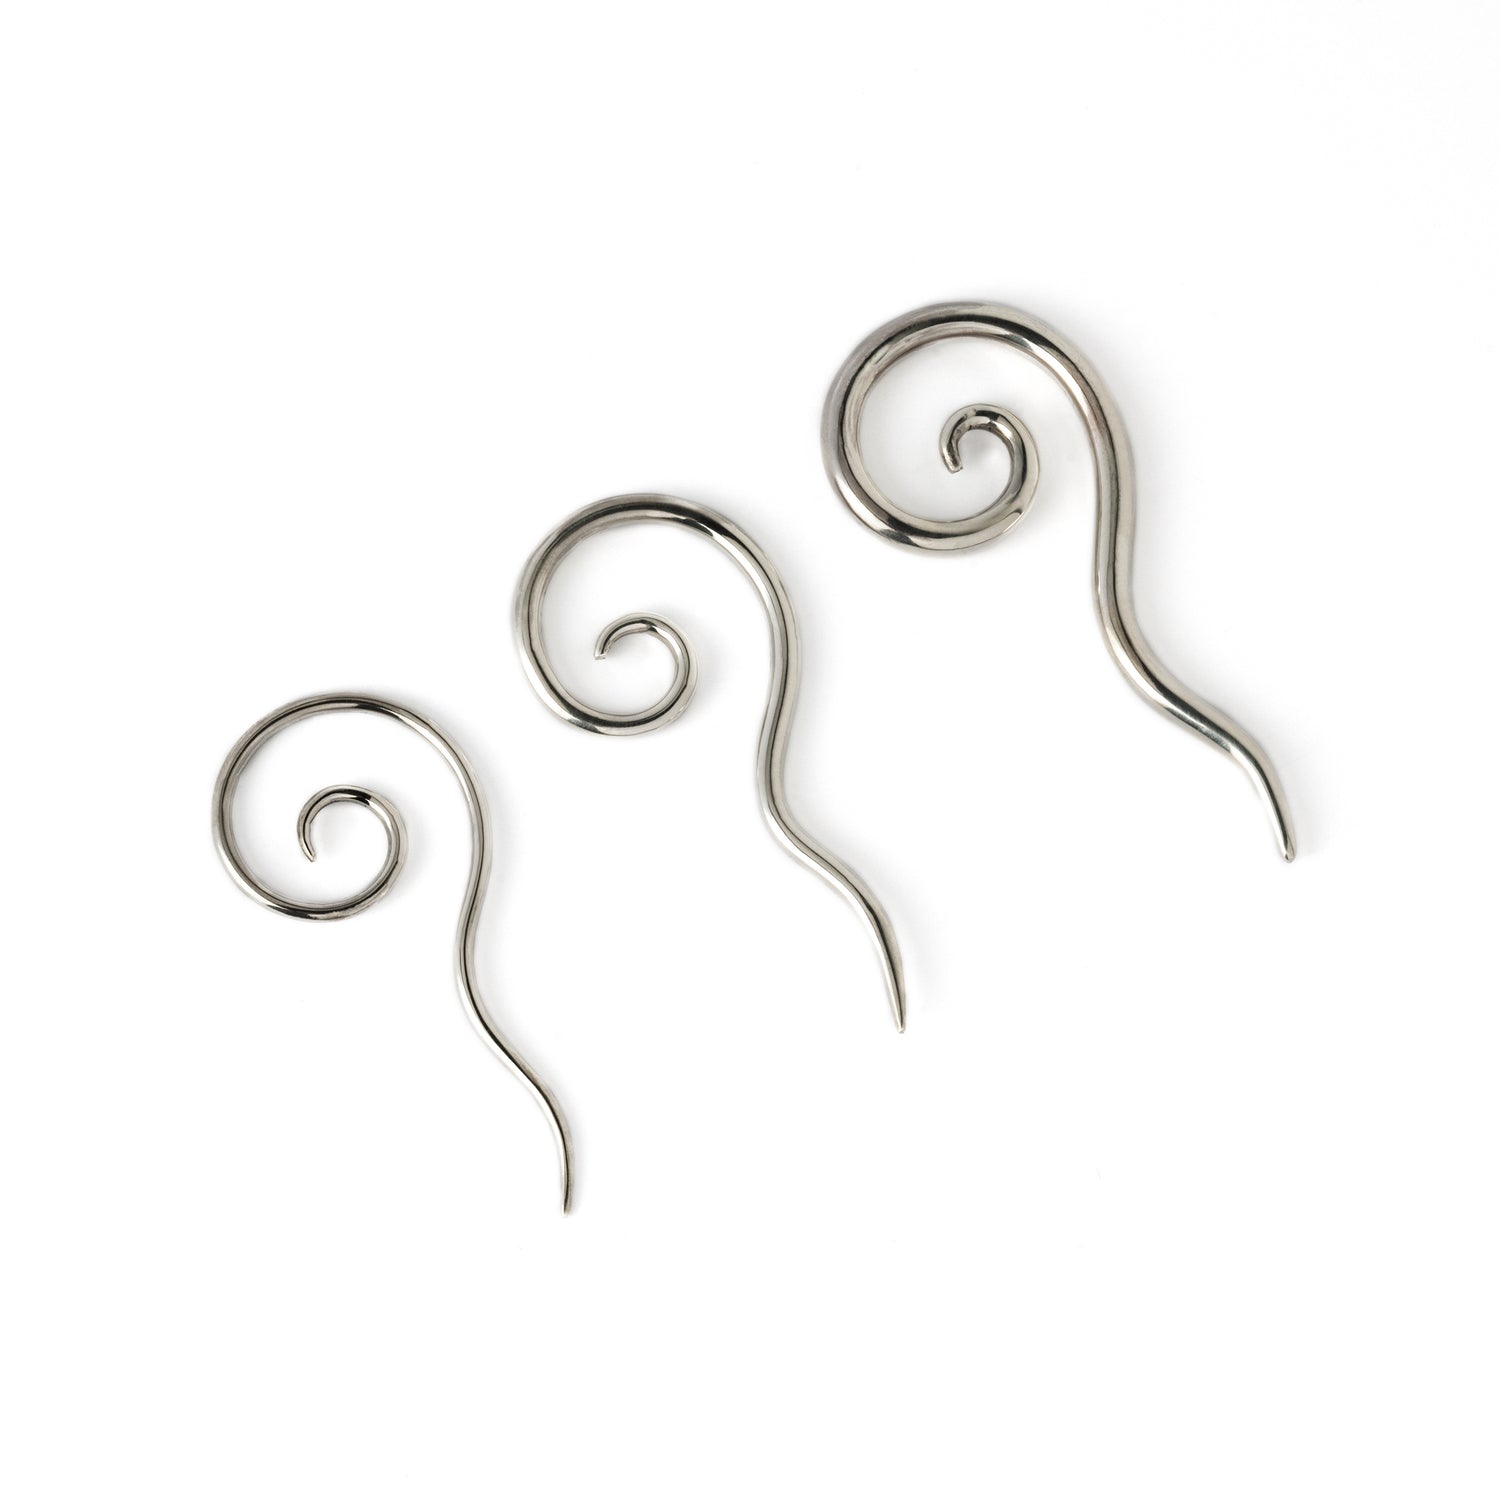 2MM 3MM 4MM SILVER LONG TAILED SPIRAL EAR STRETCHER HANGERS RIGHT SIDE VIEW